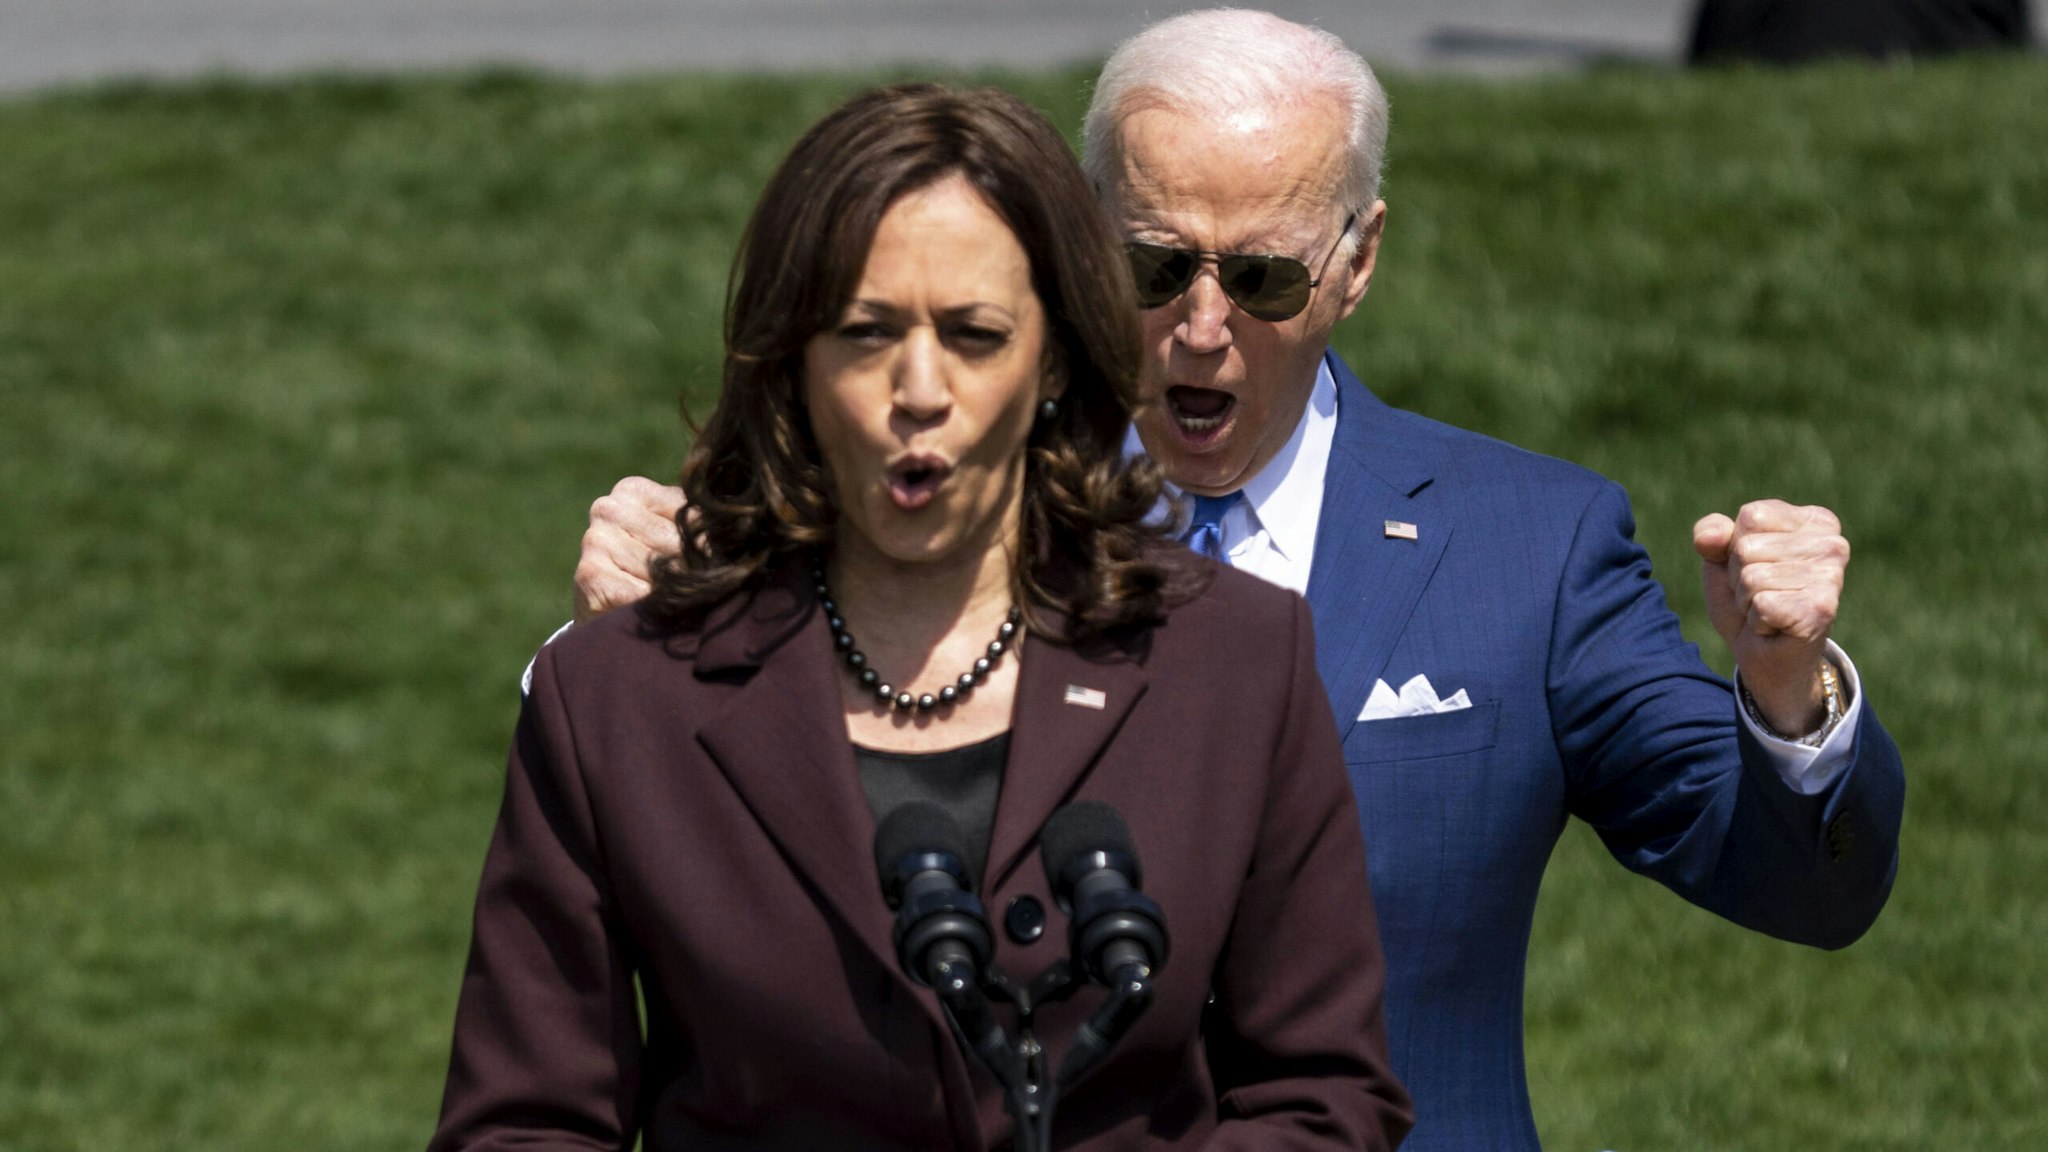 WASHINGTON, DC - APRIL 08: President Joe Biden, lets out a cheer as Vice President Kamala Harris speaks about Judge Ketanji Brown Jackson during an event on the South Lawn of the White House on April 08, 2022 in Washington, DC. Judge Jackson was confirmed yesterday to the Supreme Court of the United States making history as the first Black woman to join its ranks while leaving the ideological balance on the nation's highest court unchanged.